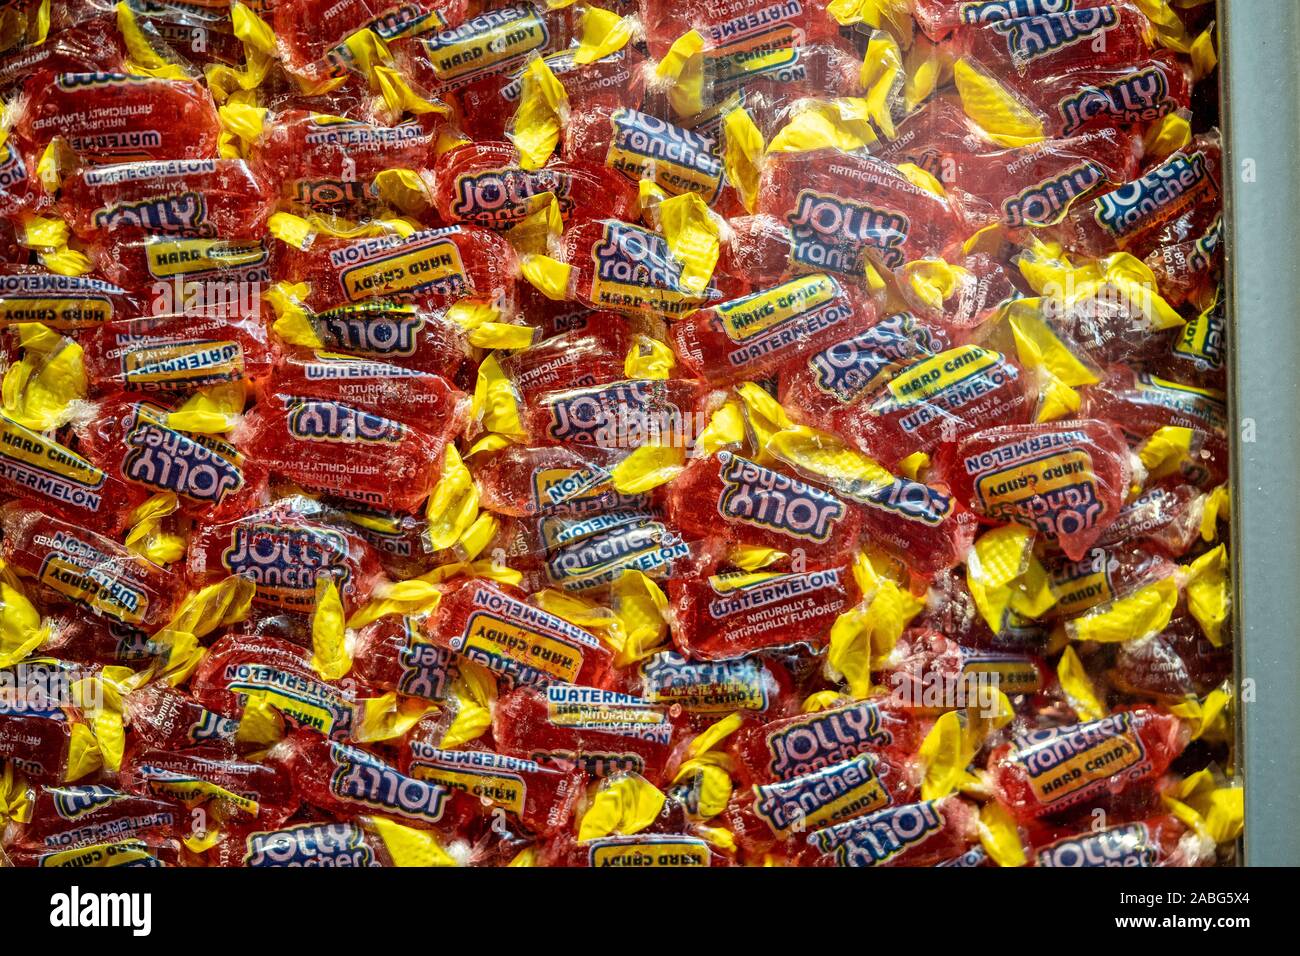 Hershey, PA / USA - November 26, 2019:  Foil wrapped Hershey’s Jolly Rancher Watermelon Hard Candy on display in Chocolate World. Stock Photo